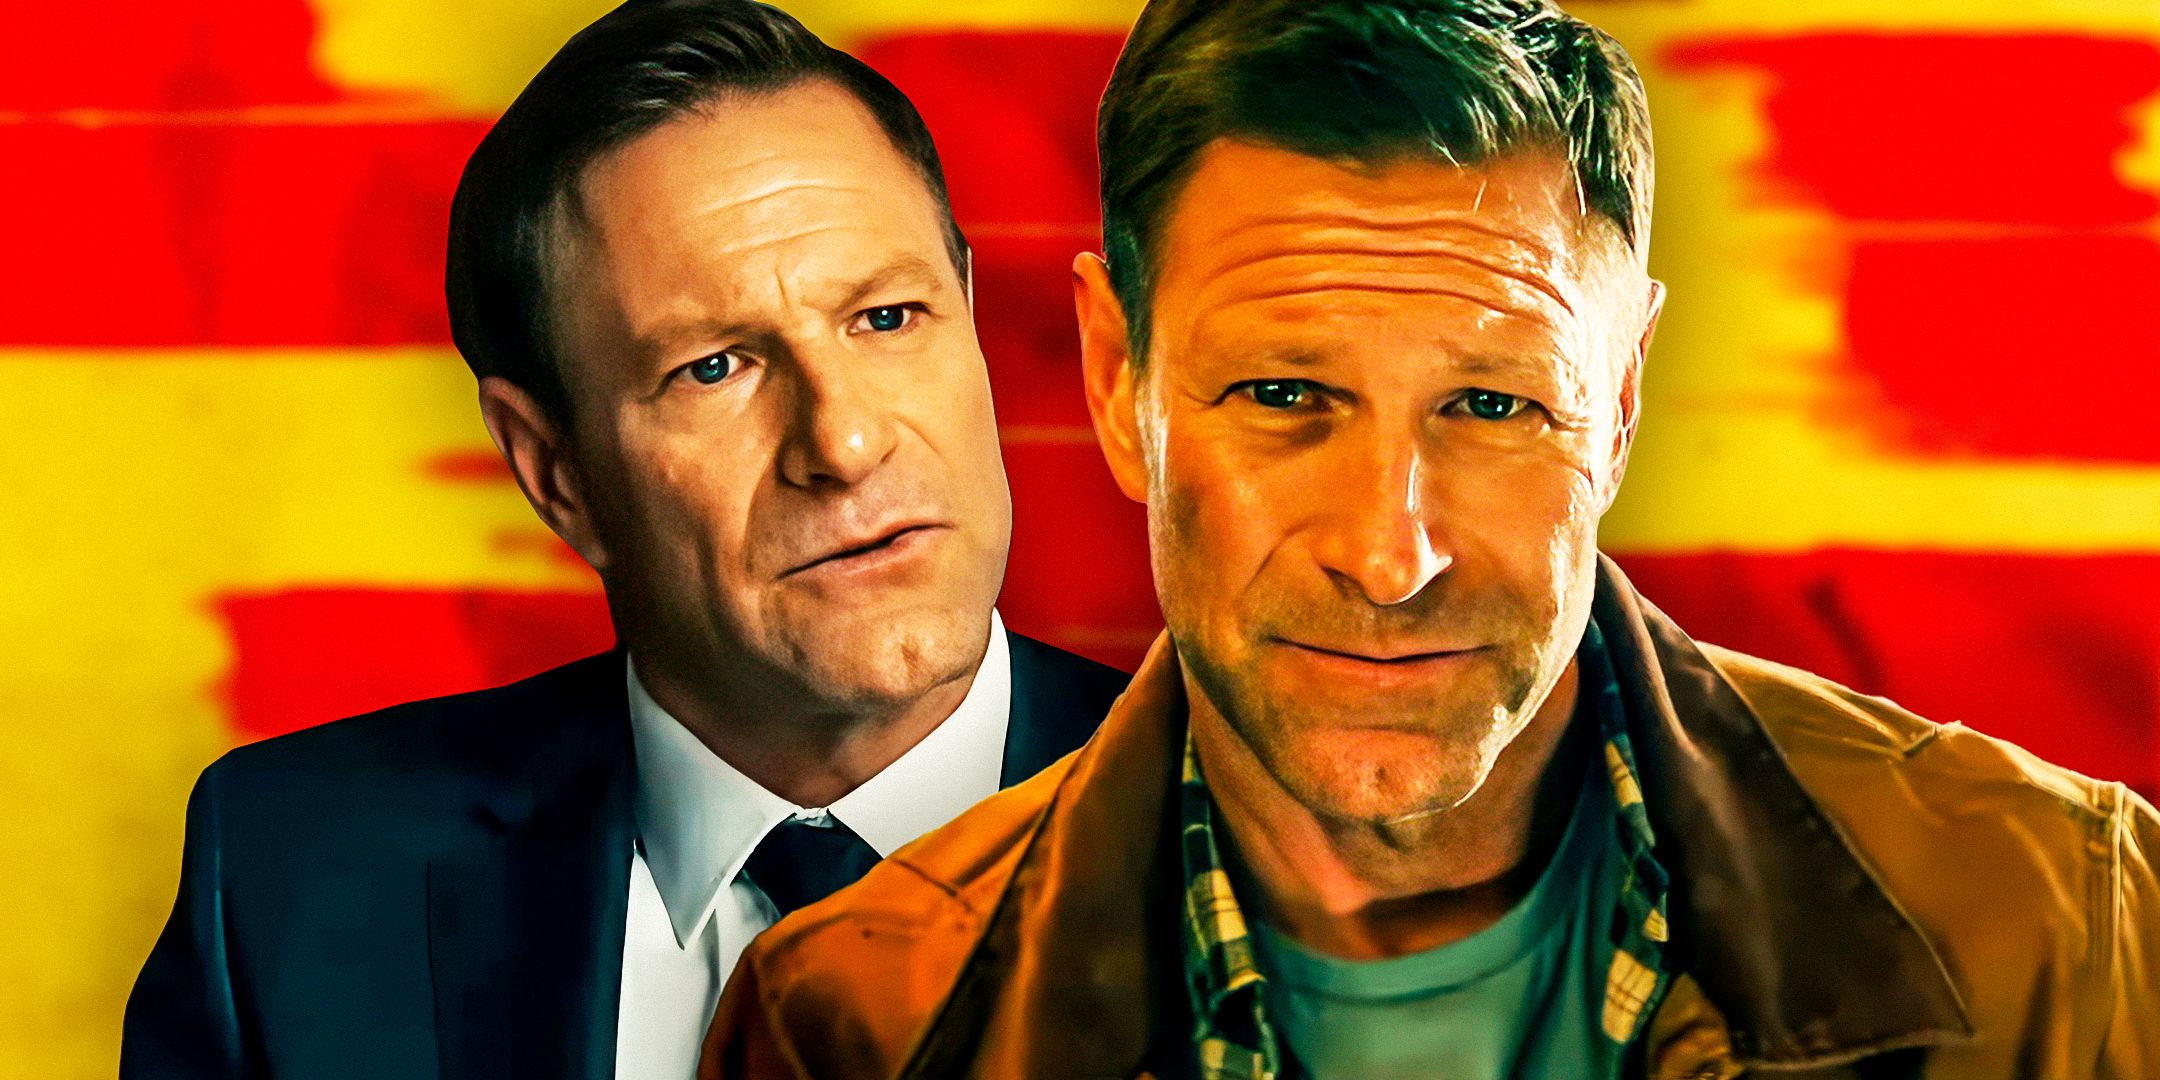 Aaron Eckhart’s New Movie Is A Must-Watch Thanks To Continuing His Great Recent Career Trend